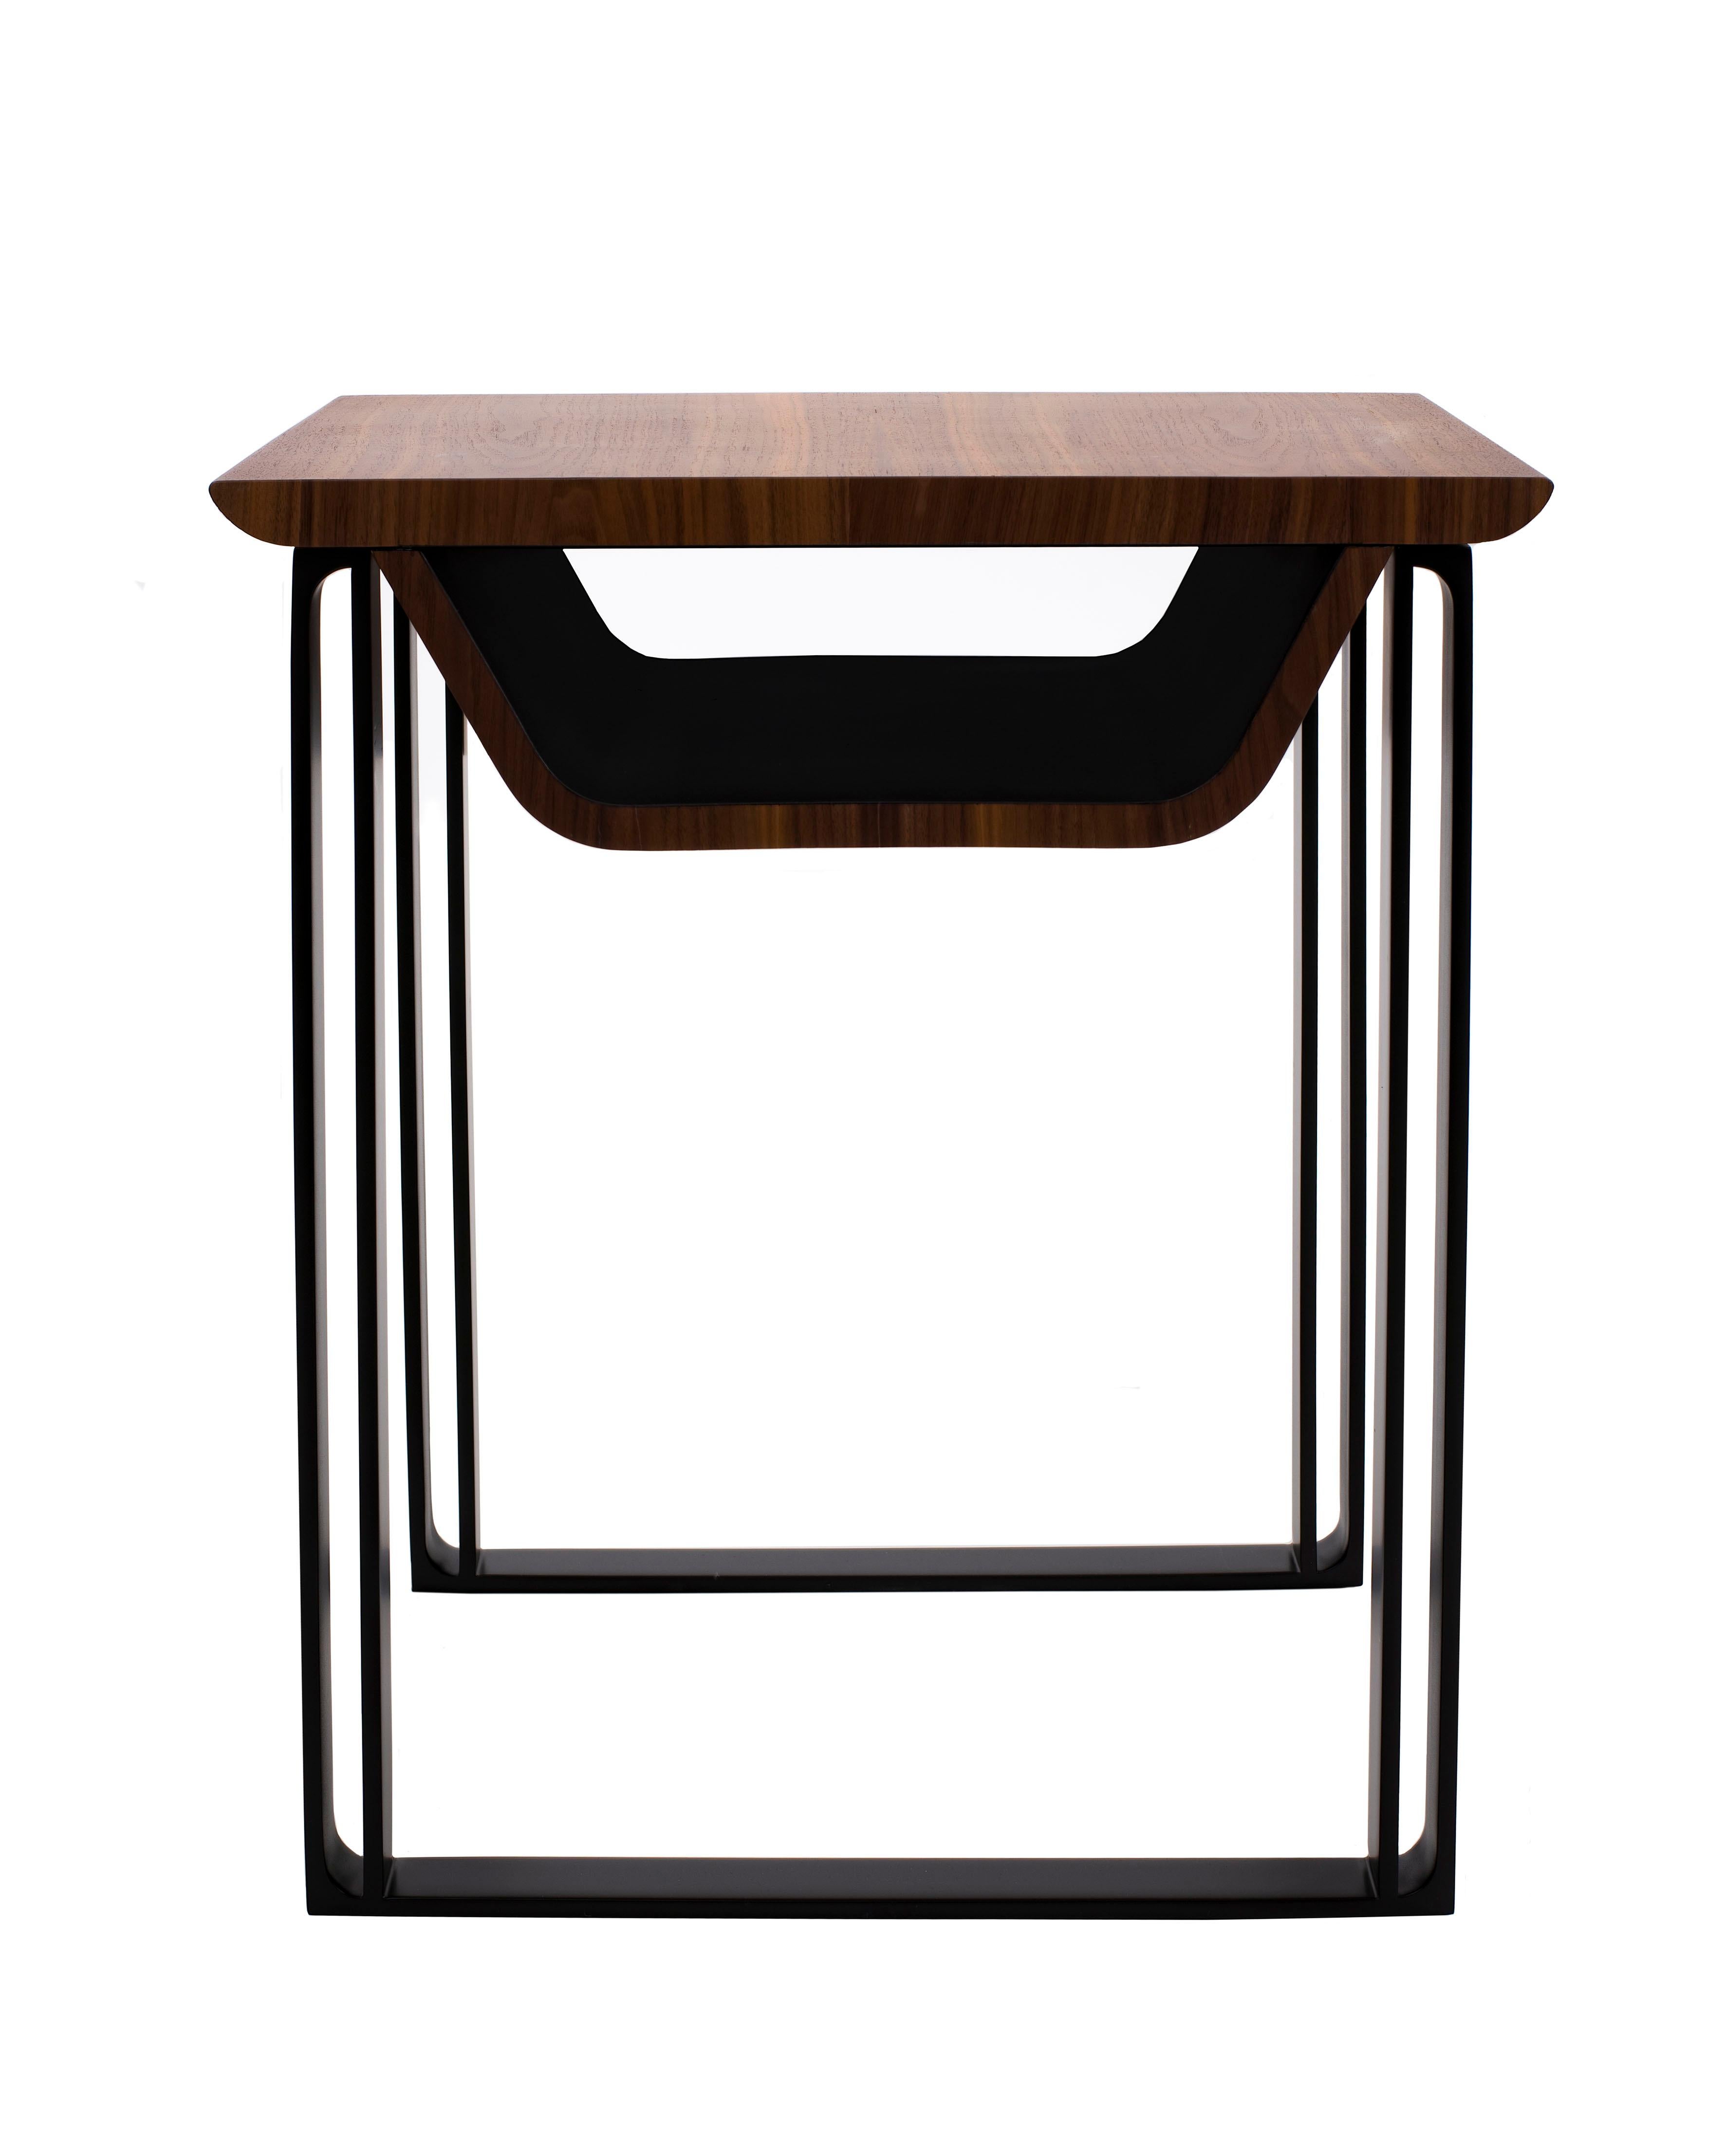 Portuguese Modern Bedside Table / Side Table Wood and Steel by Cyril Rumpler For Sale